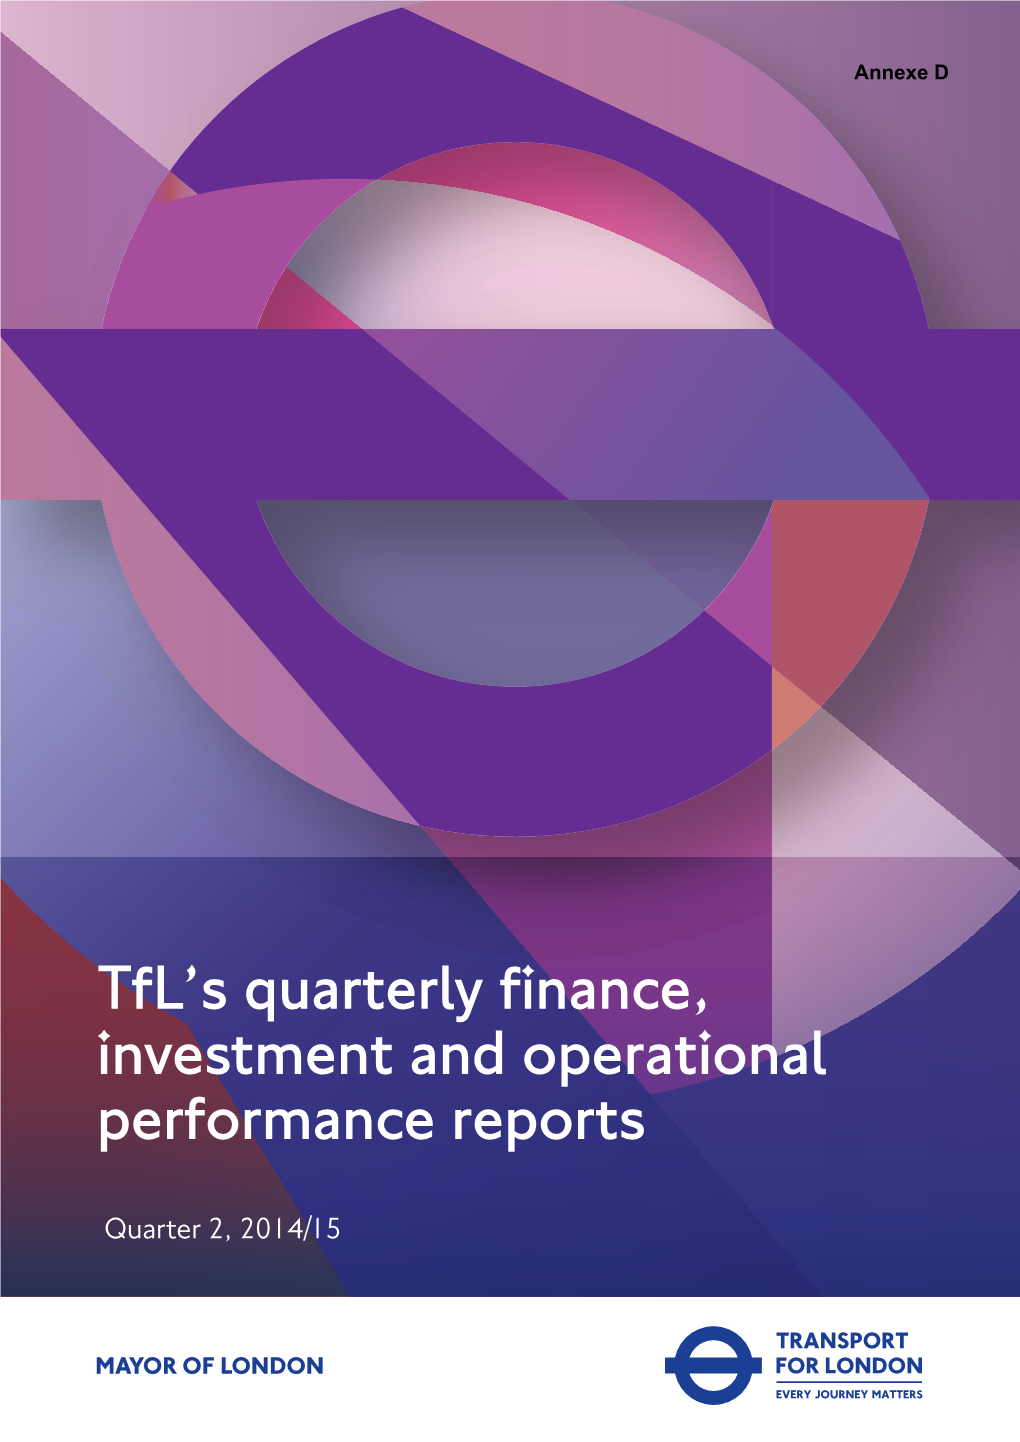 Q2 2014/15 Operational and Financial Performance Report